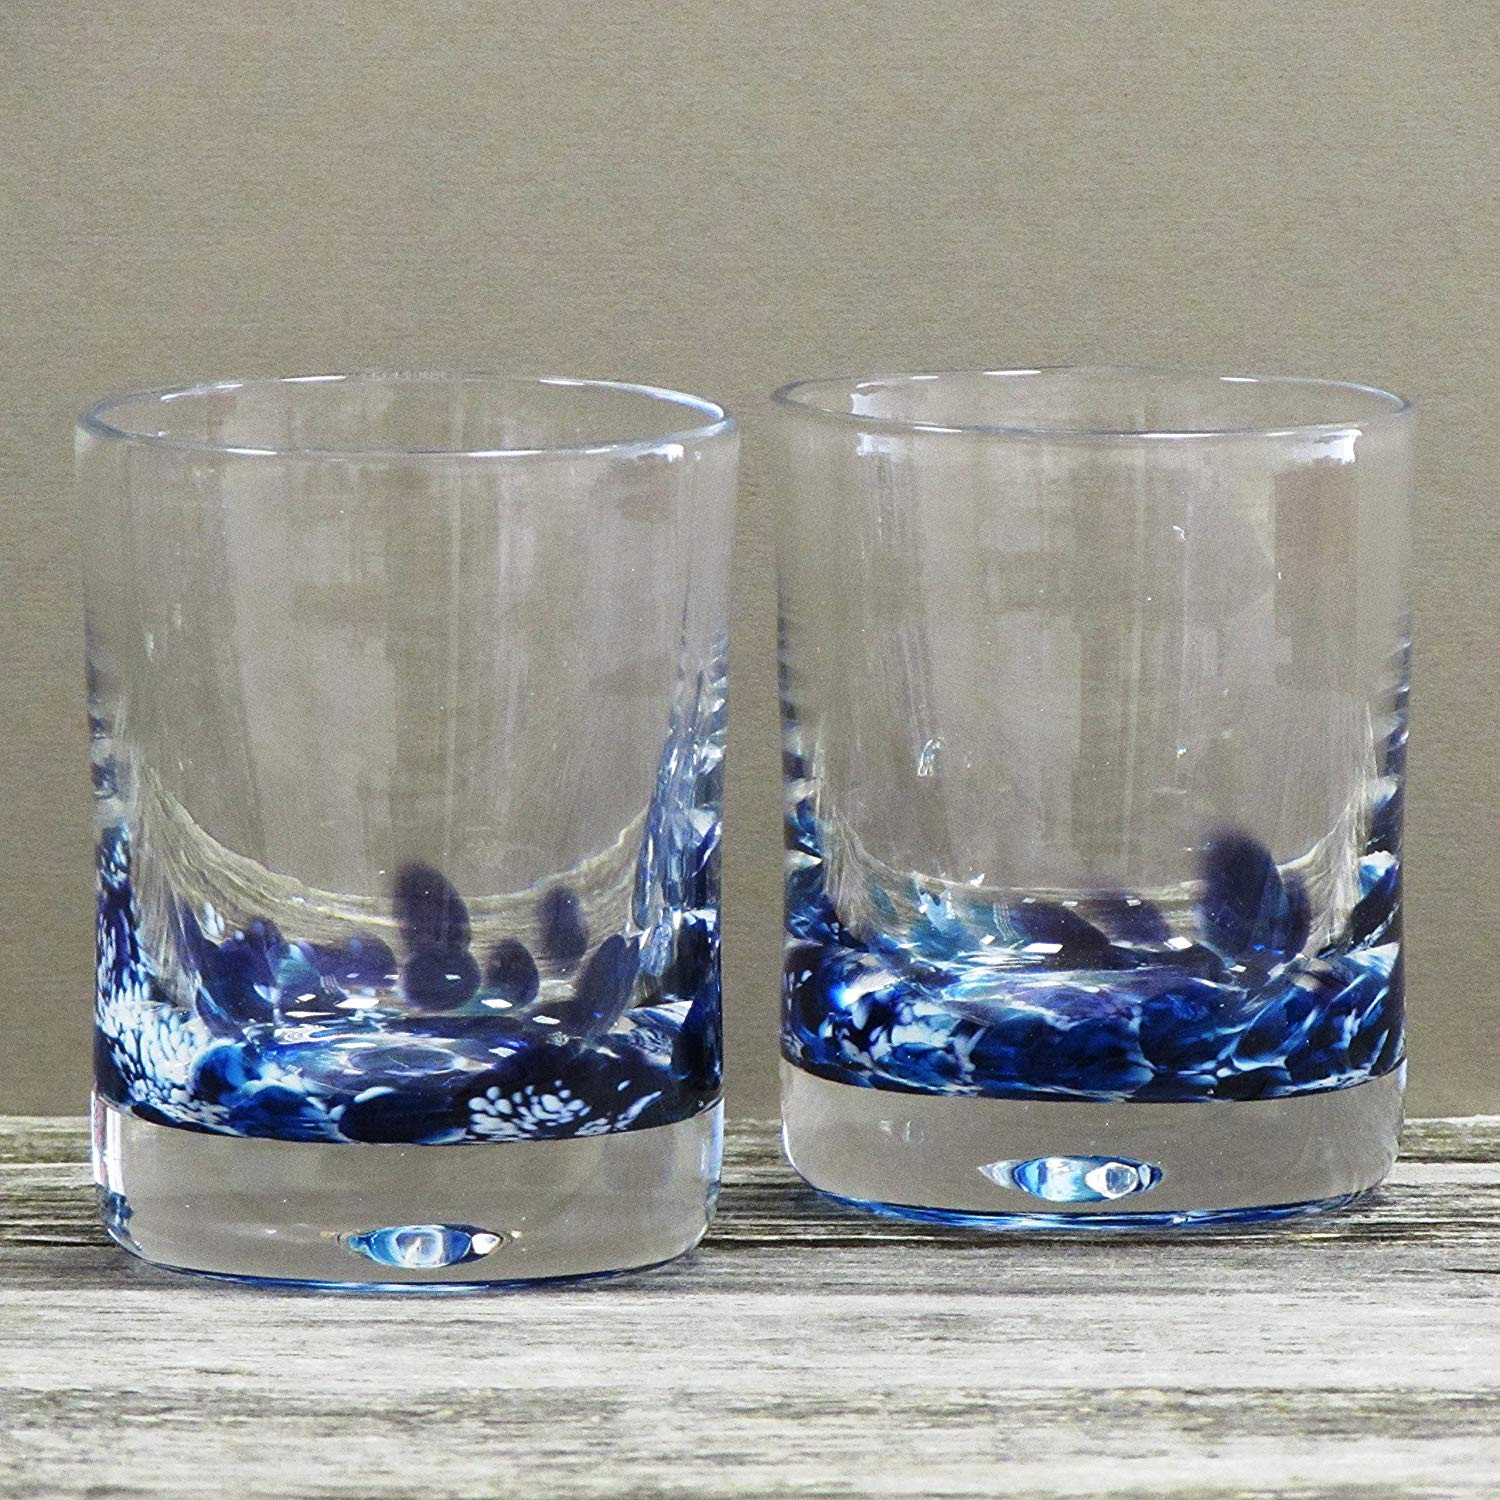 15 Recommended Waterford Blue Crystal Vase 2024 free download waterford blue crystal vase of amazon com irish handmade whiskey scotch glasses by jerpoint in amazon com irish handmade whiskey scotch glasses by jerpoint glass studios ireland set of two h